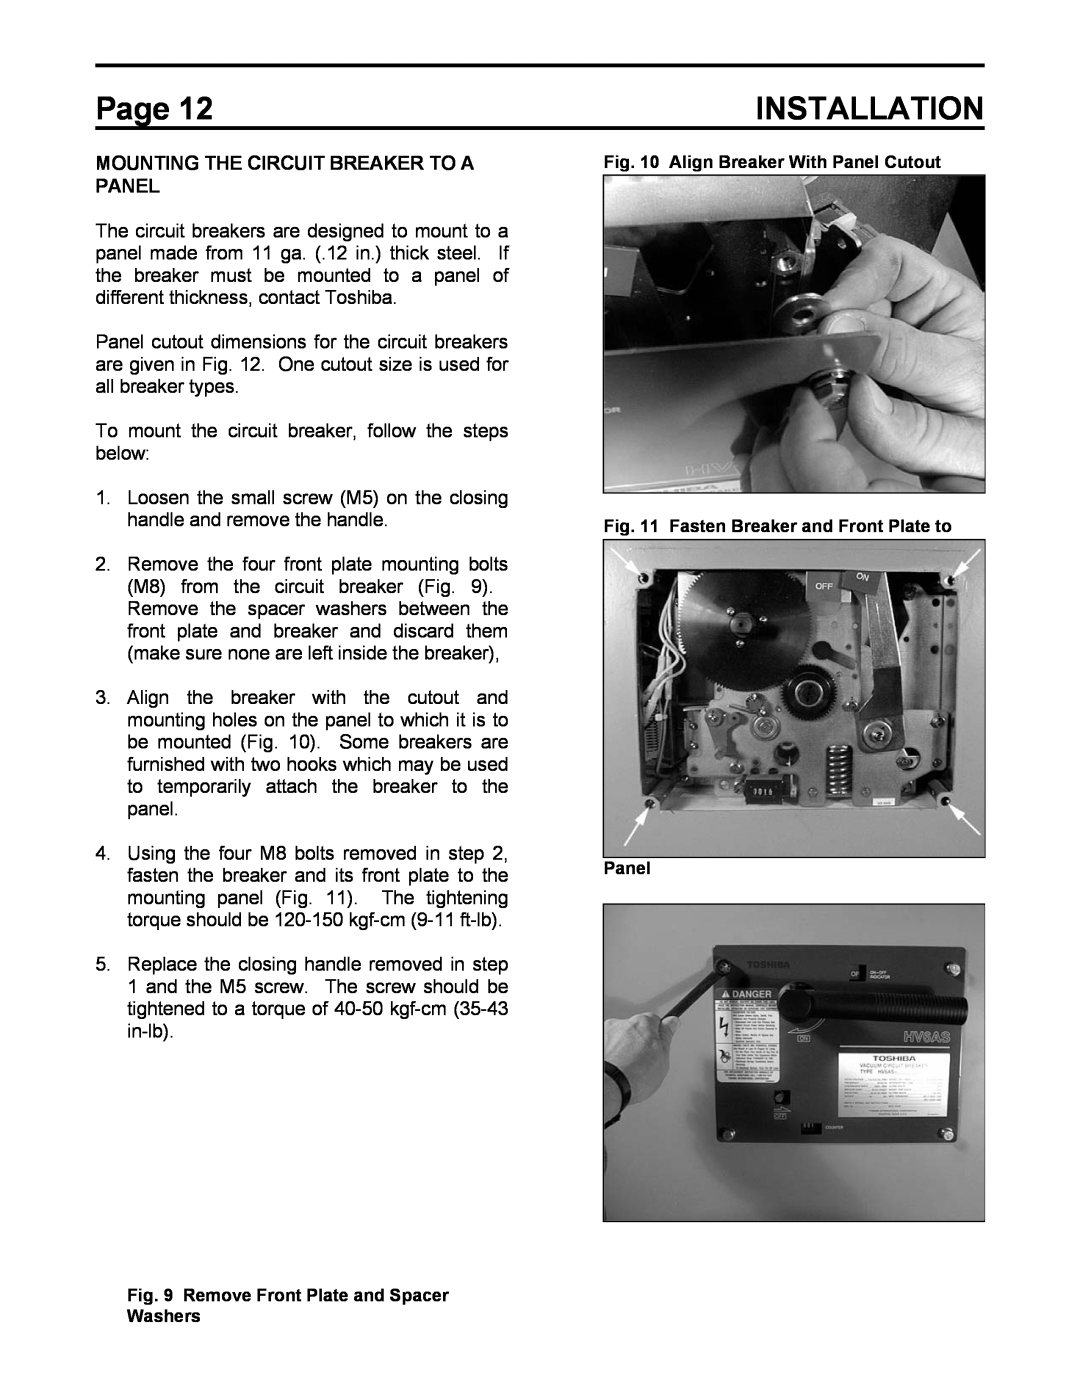 Toshiba HV6AS instruction manual Installation, Mounting The Circuit Breaker To A Panel, Page 